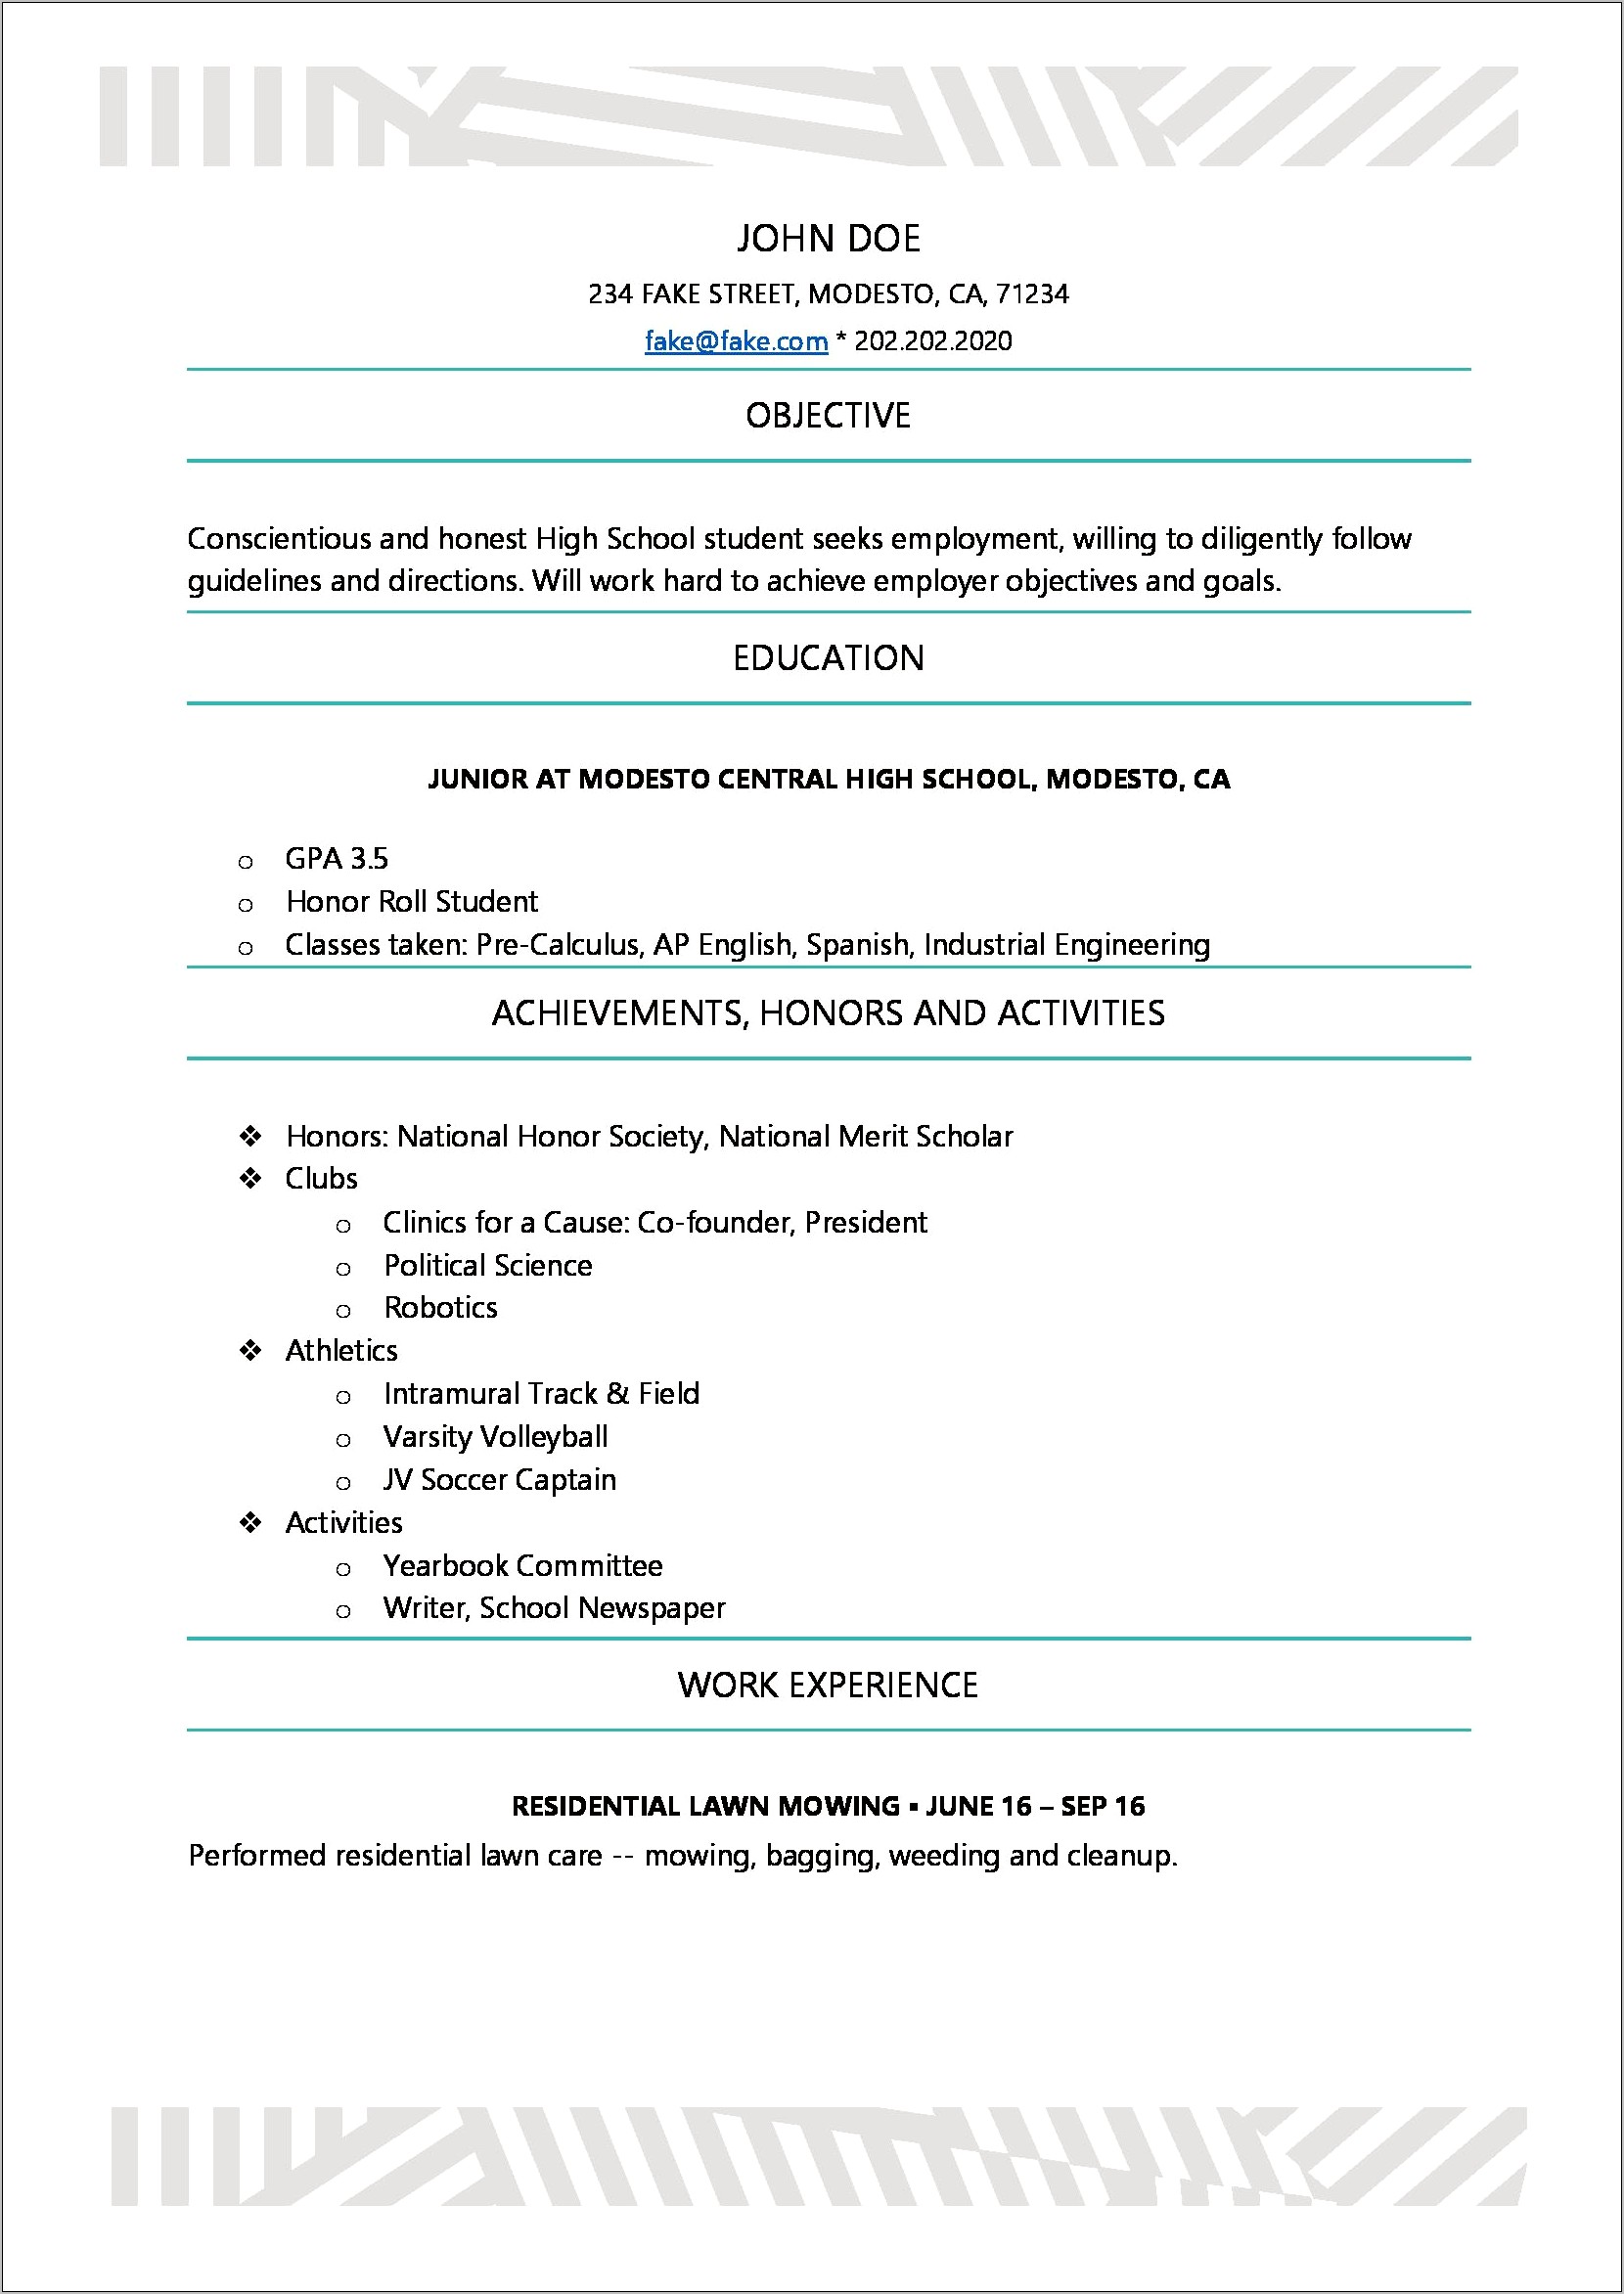 Creating Resumes For High School Students